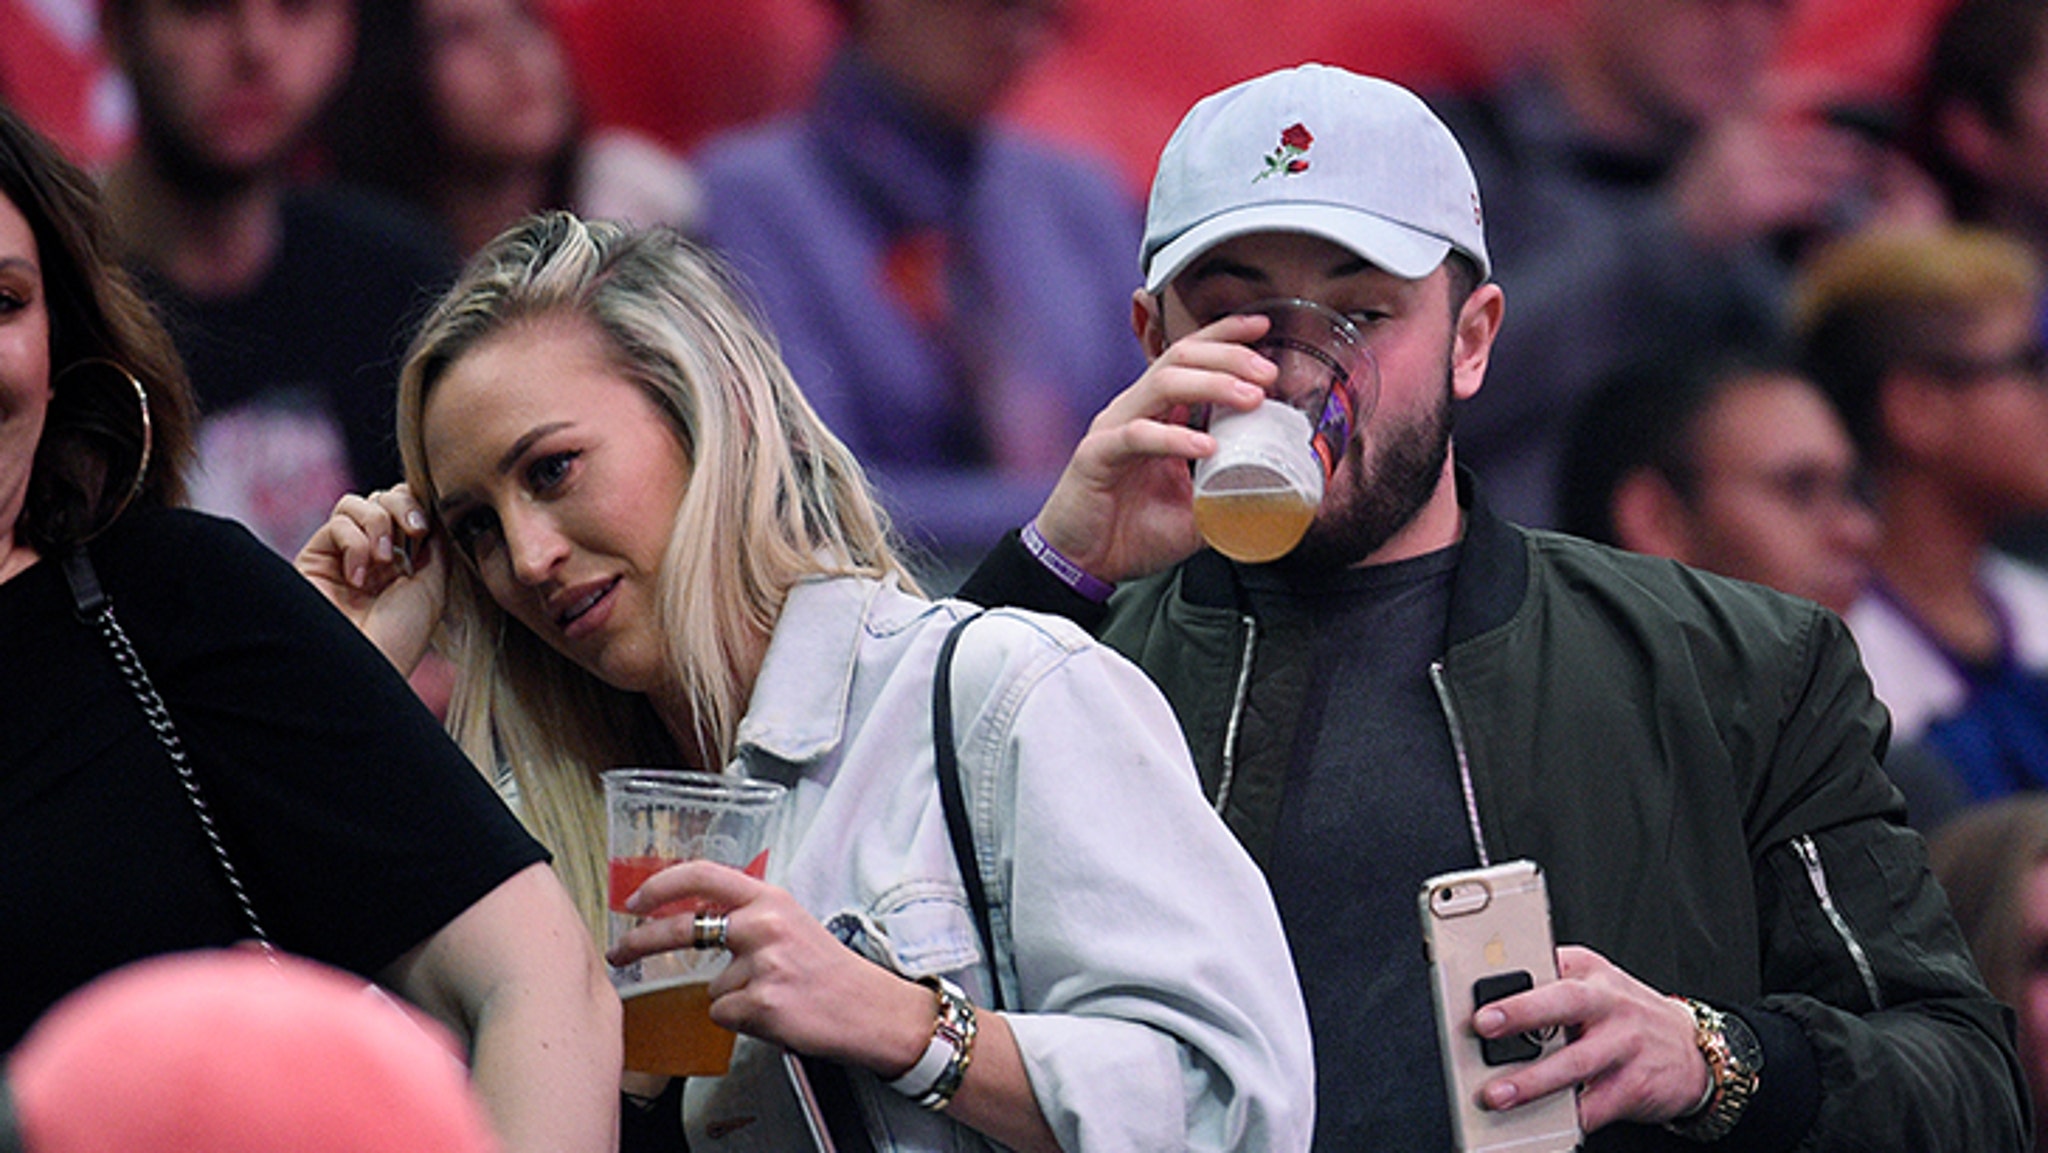 Baker Mayfield Crushes Beers At Clippers Game With Hot